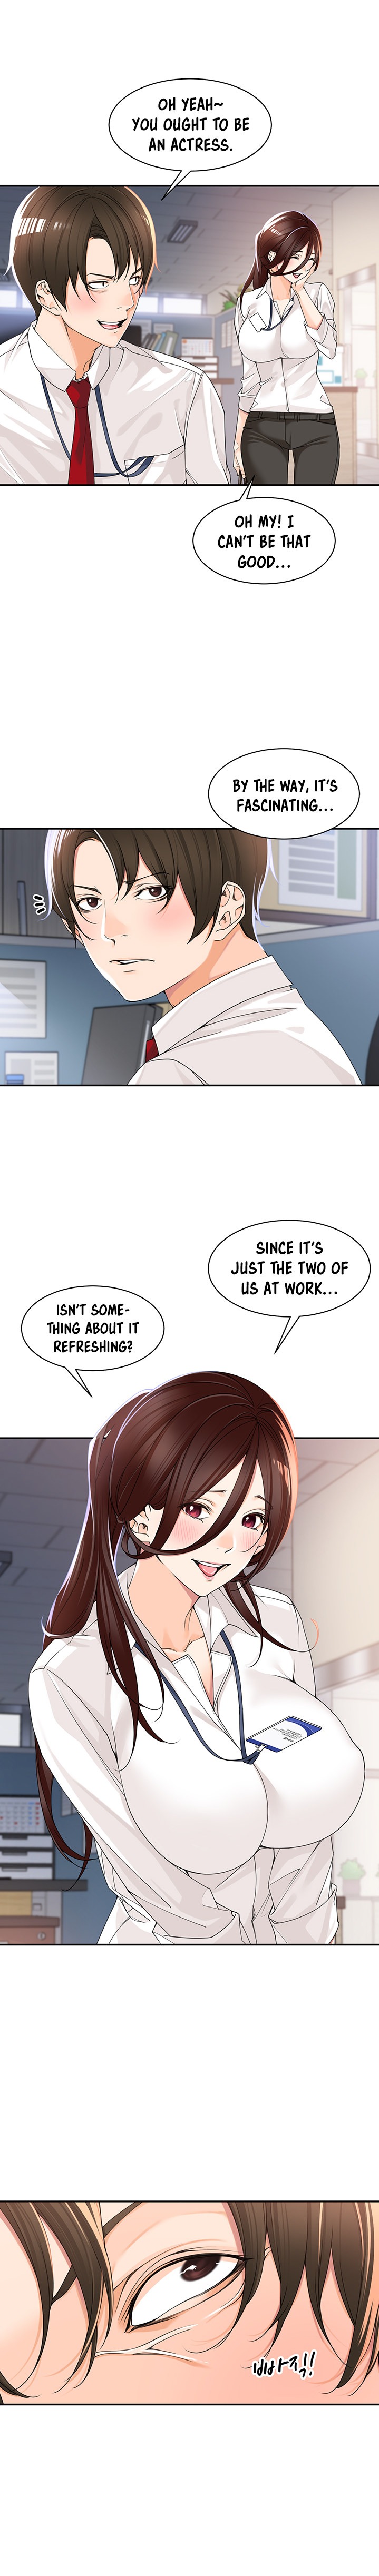 Manager, Please Scold Me - Chapter 5 Page 13